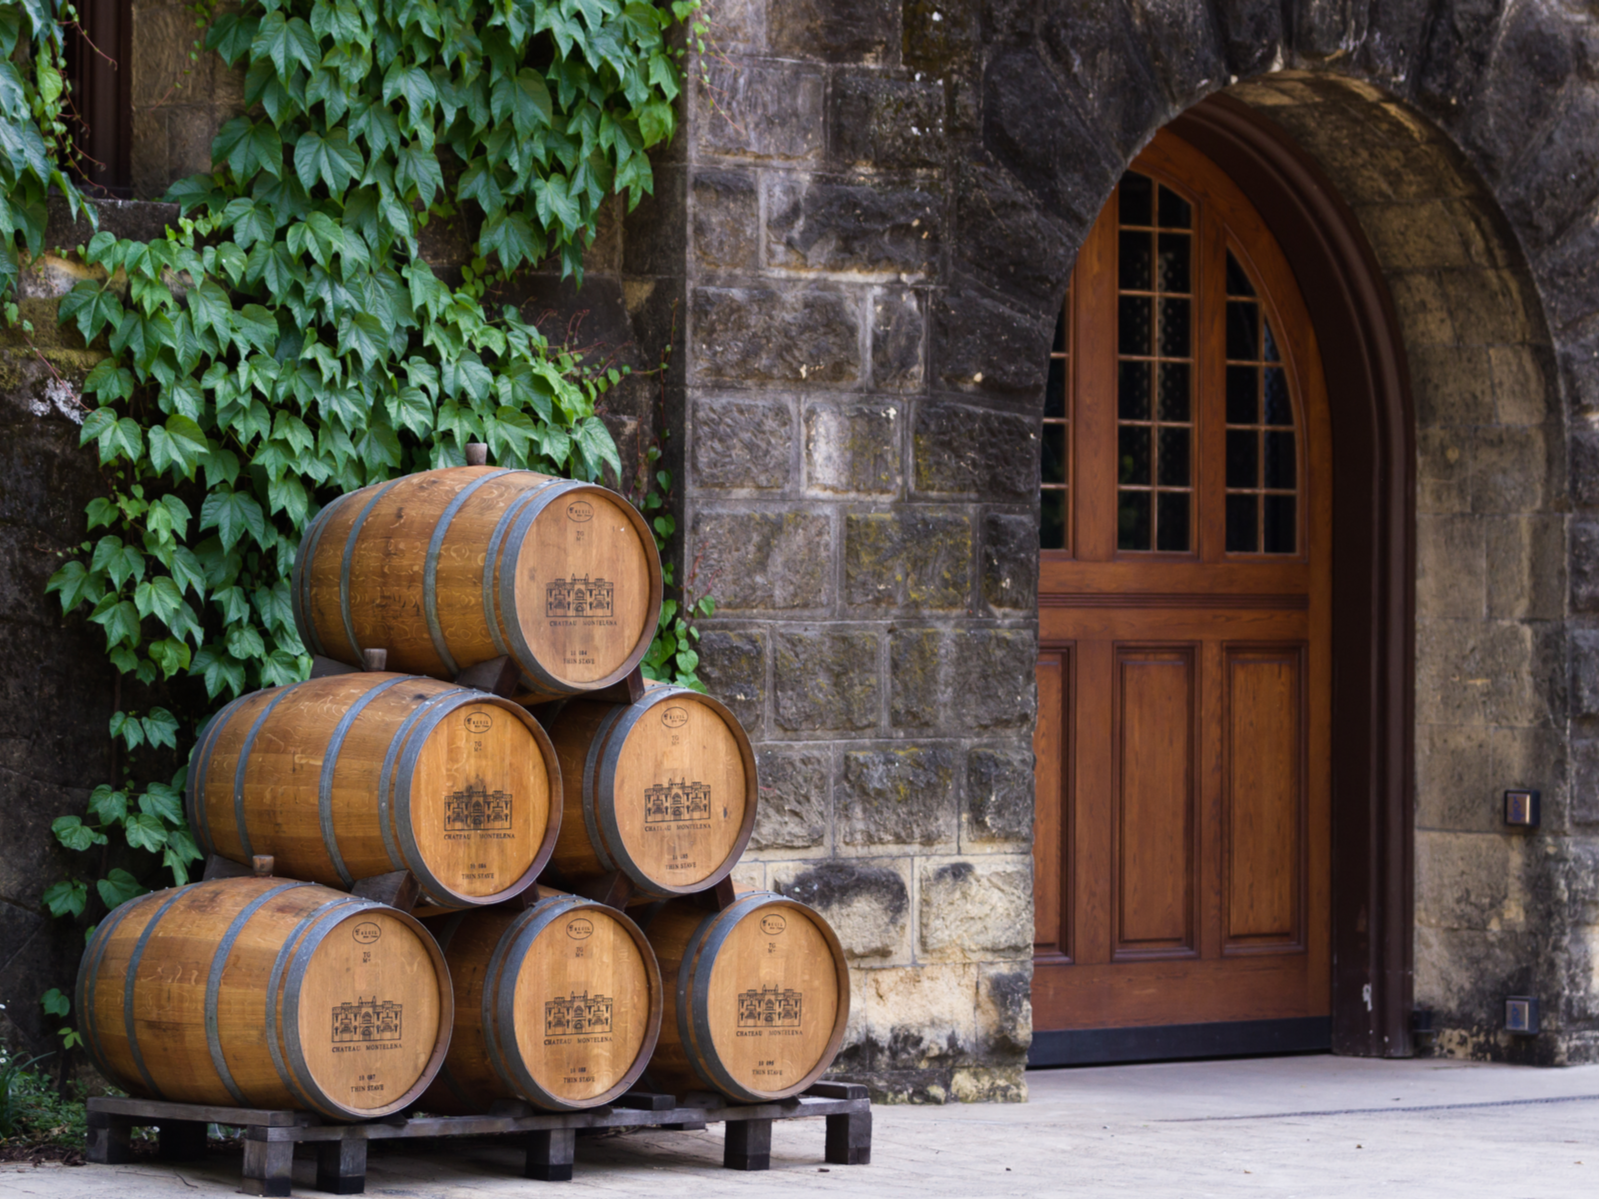 Calistoga wine barrels outside Chateau Montelena during the best time to go to Napa Valley